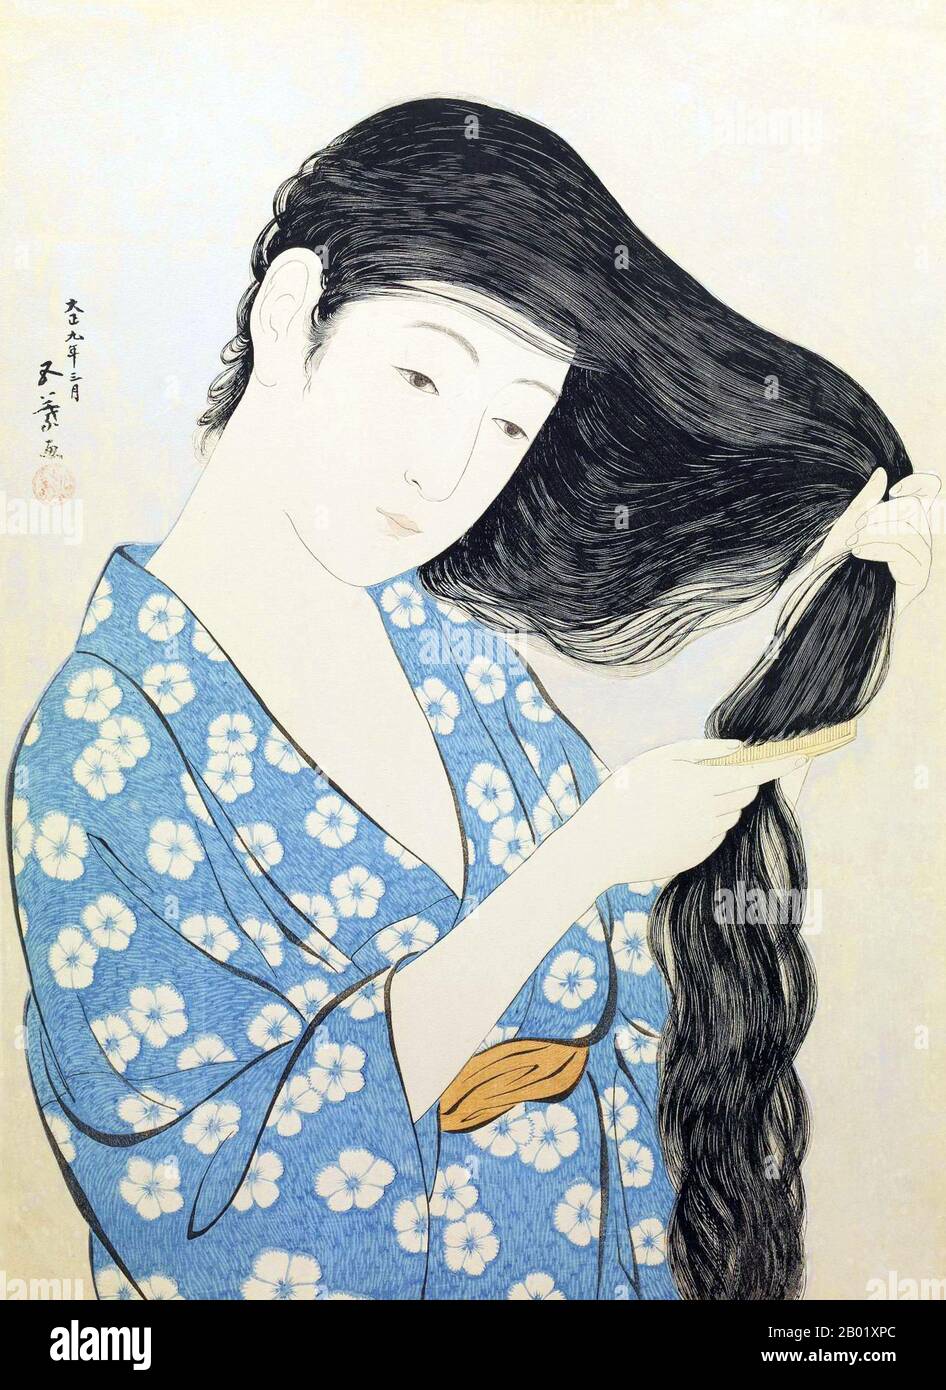 Goyō Hashiguchi (橋口 五葉 Hashiguchi Goyō, December 21, 1880 - February 24, 1921) was a Japanese painter and woodblock artist.  Hashiguchi was born Hashiguchi Kiyoshi in Kagoshima Prefecture. His father Hashiguchi Kanemizu was a samurai and amateur painter in the Shijo style. His father hired a teacher in the Kano style of painting in 1899 when Kiyoshi was only ten. Kiyoshi took the name of Goyo while attending the Tokyo School of Fine Arts, from which he graduated best in his class in 1905. Stock Photo